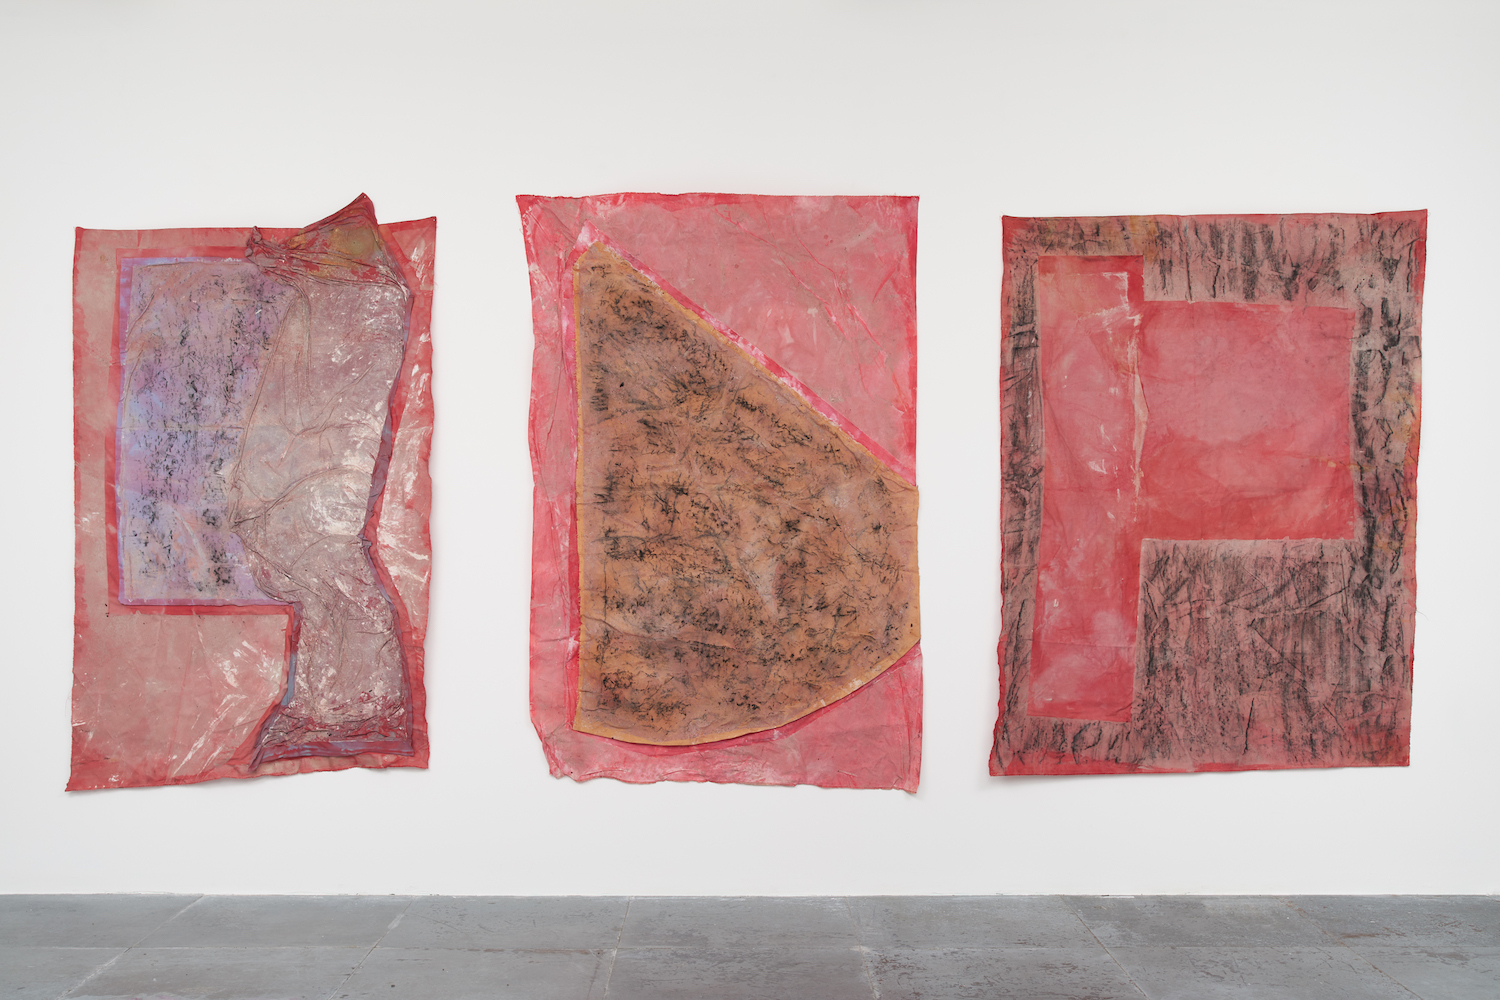 Oak - Zaytoun - Flintstone, 2022, charcoal rubbings made of different hard surfaces, dyes extracted from flowers discarded fabric, ash, each 1.7 x 1.4 m